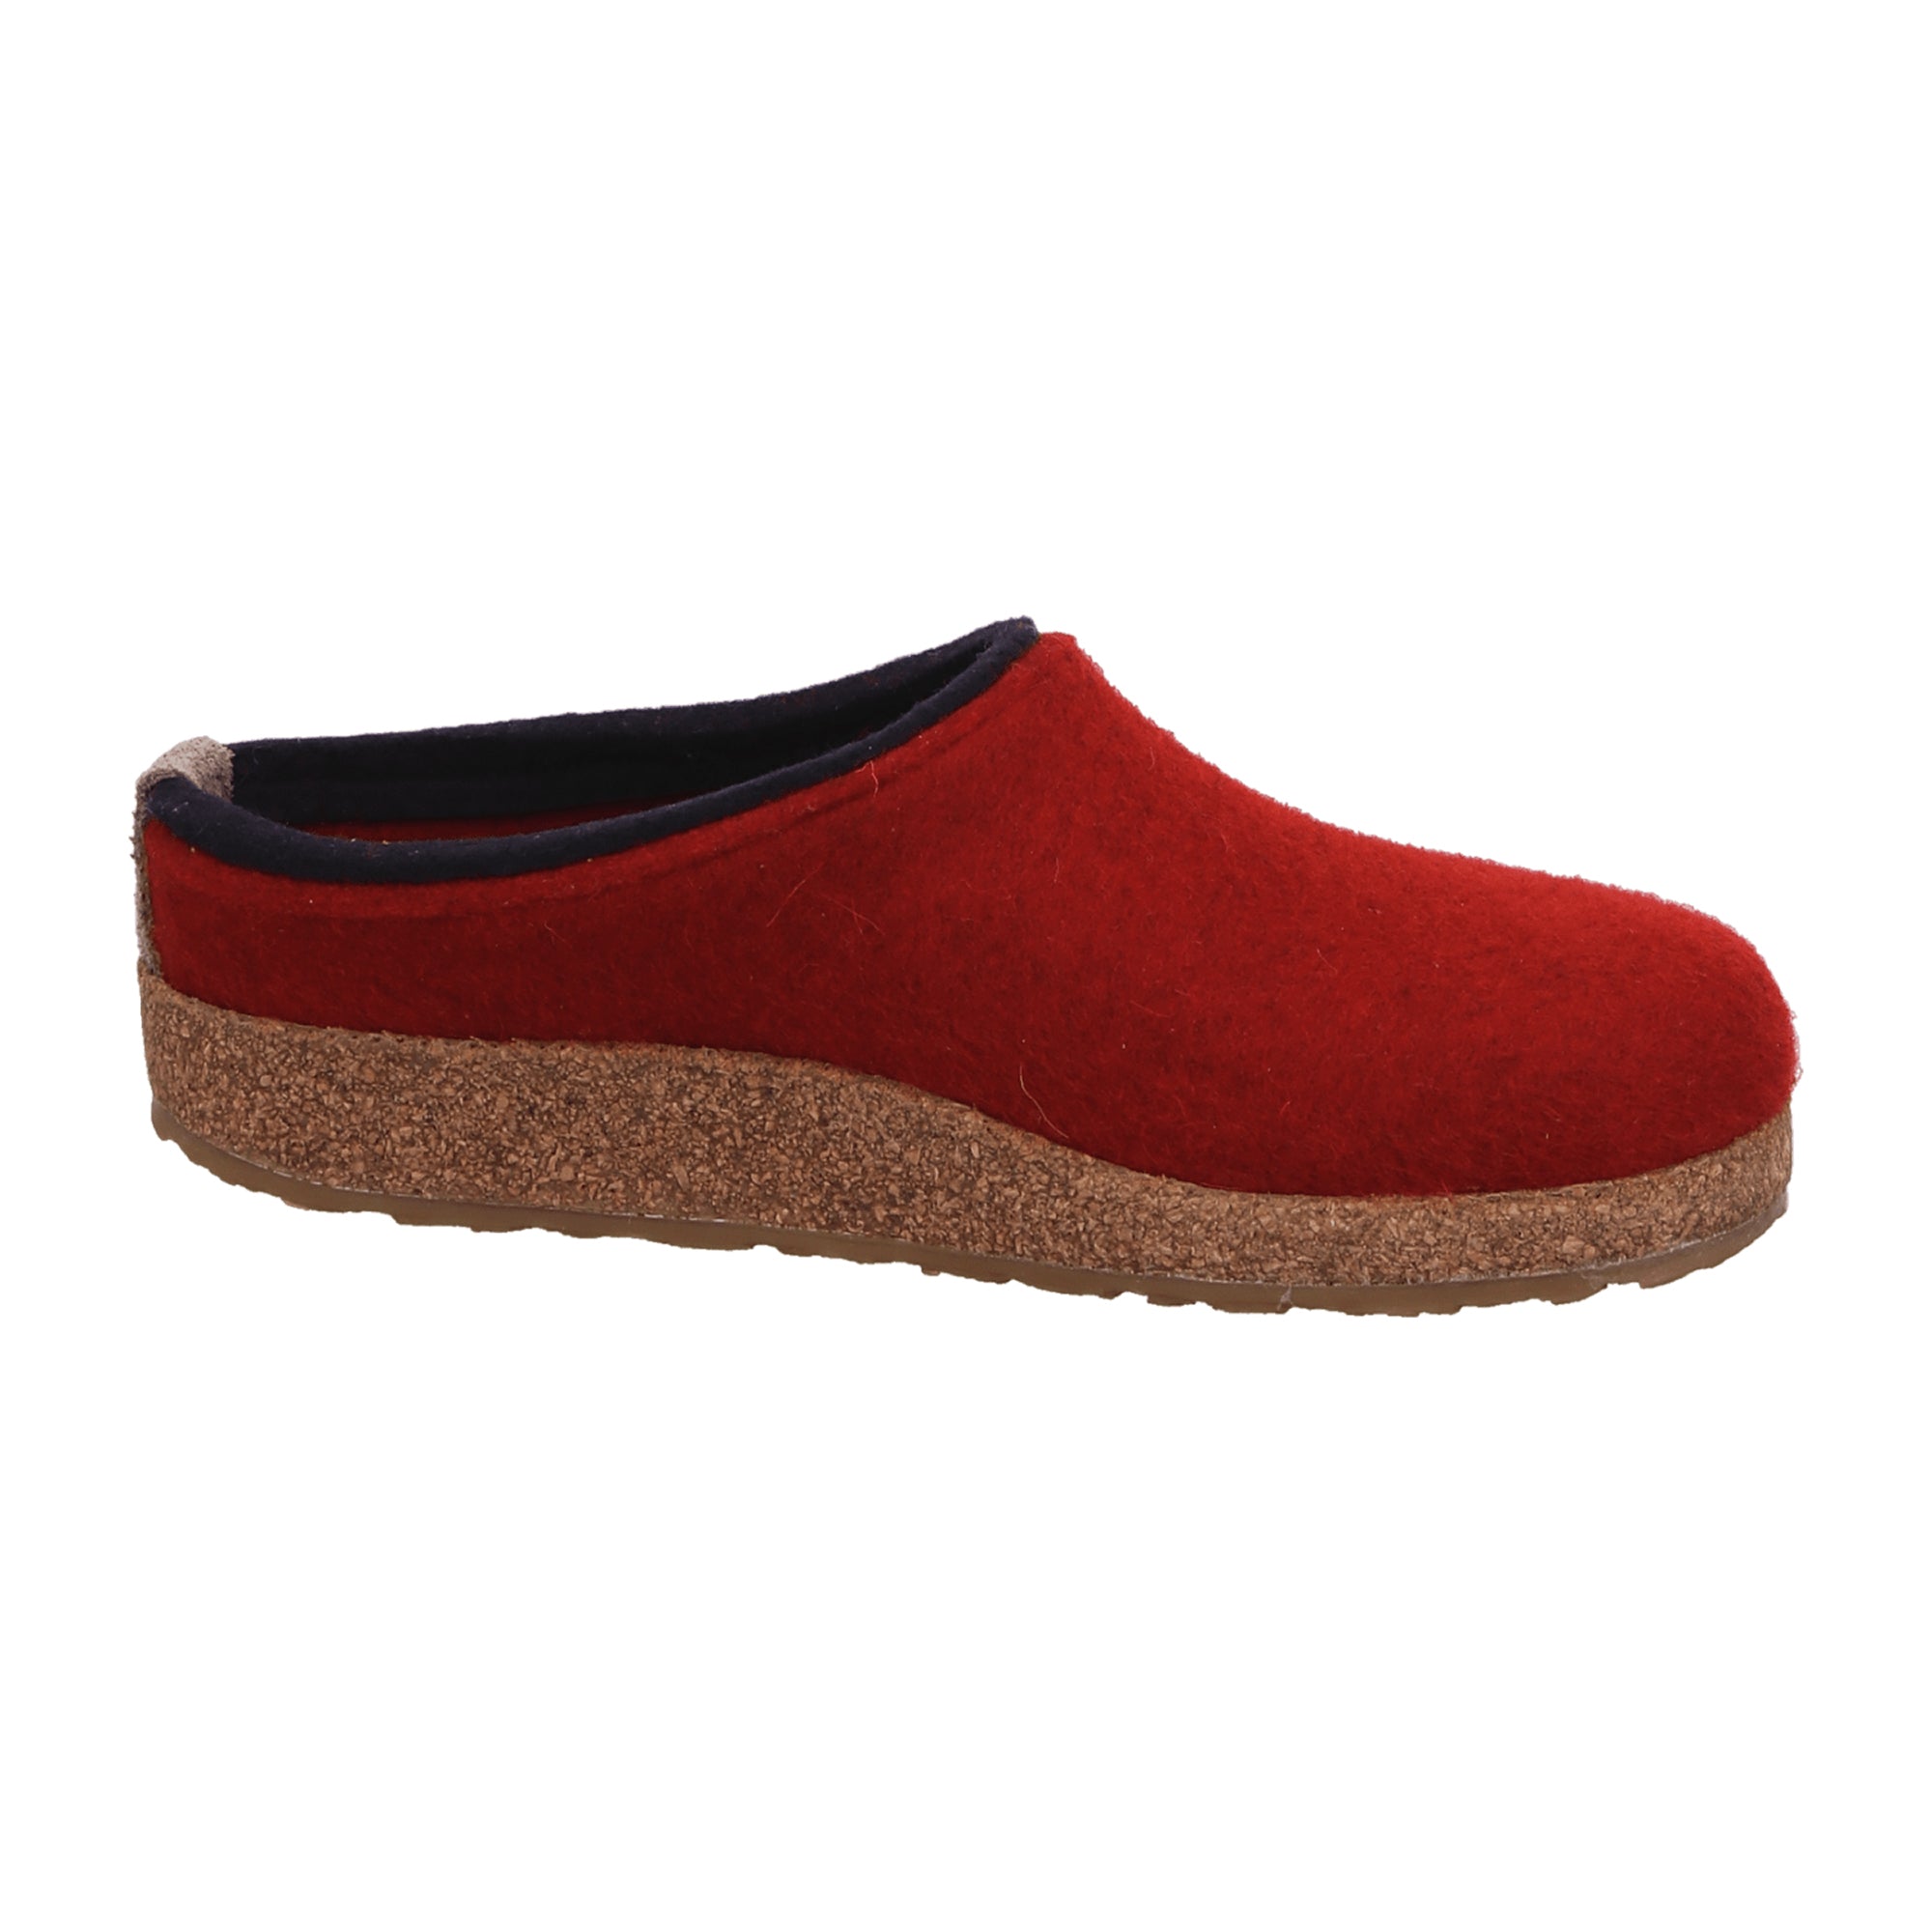 Haflinger Grizzly Kris Women's Clogs, Red - Durable & Stylish